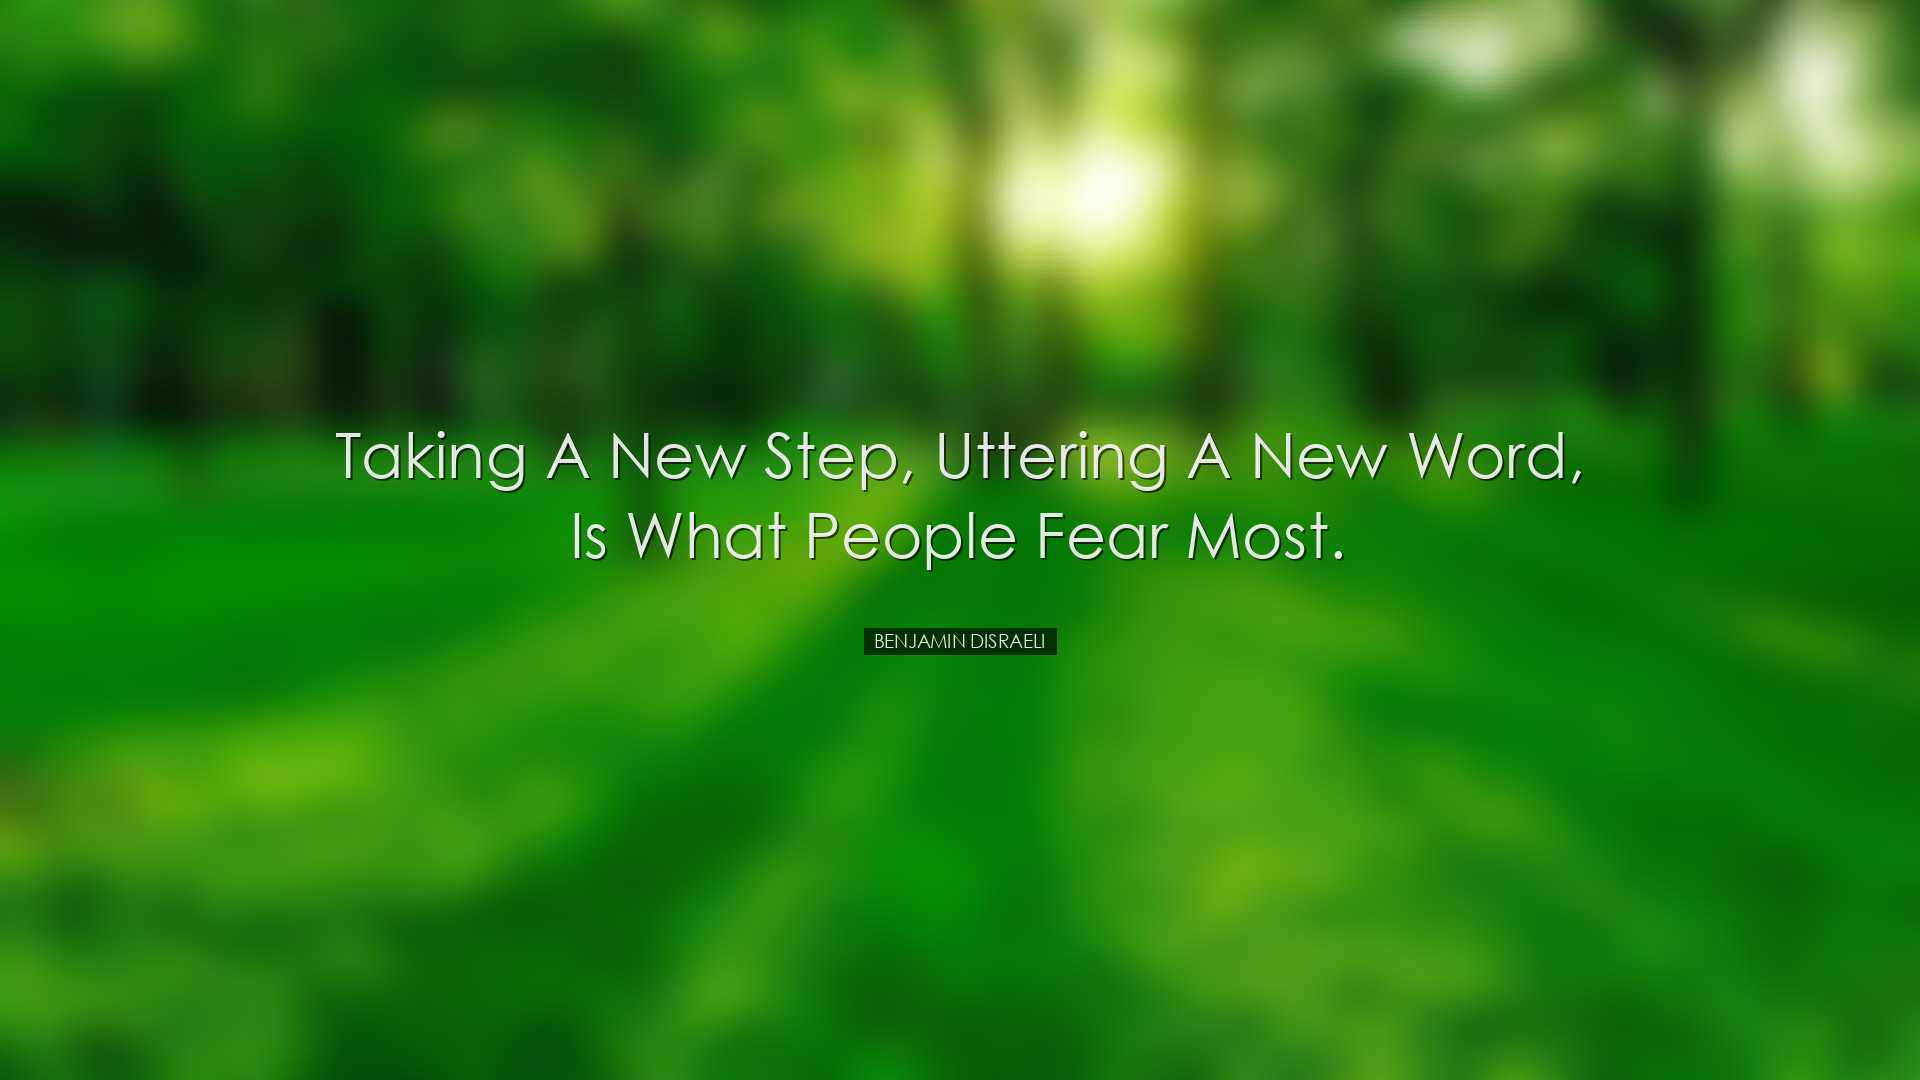 Taking a new step, uttering a new word, is what people fear most.